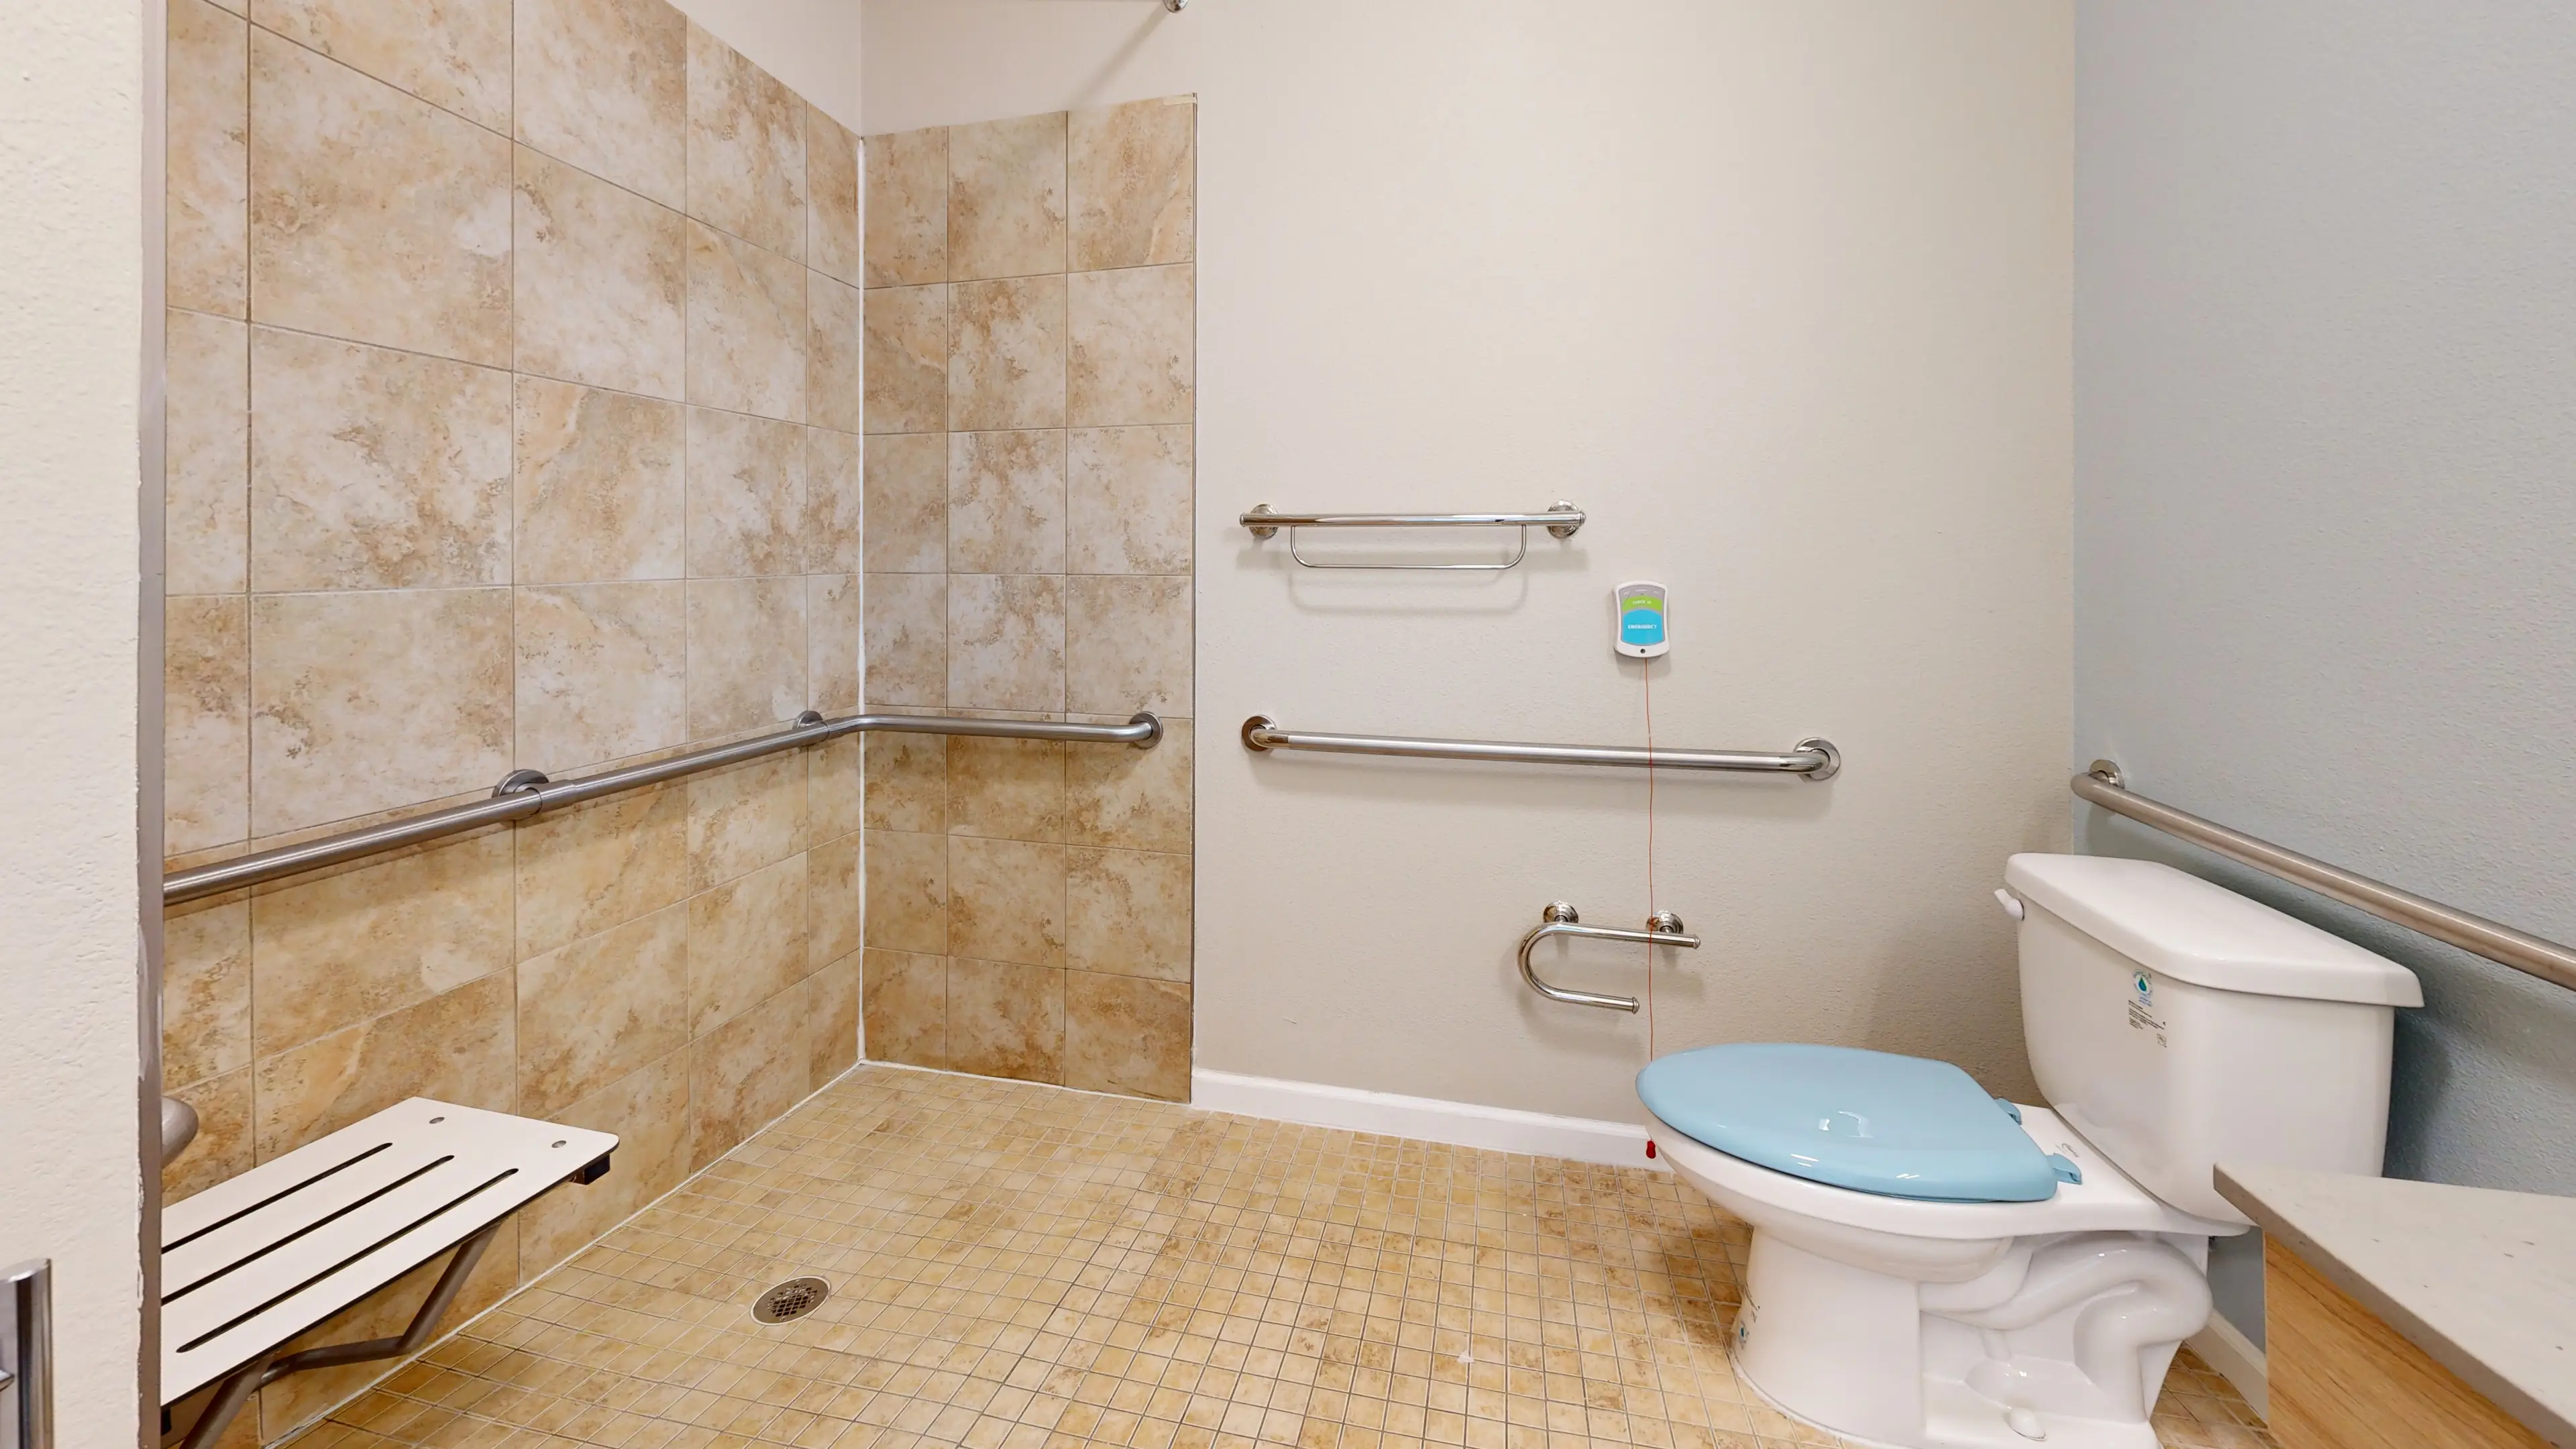 Auberge at Onion Creek Assisted Living 2 Bed 1 Bath Bathroom